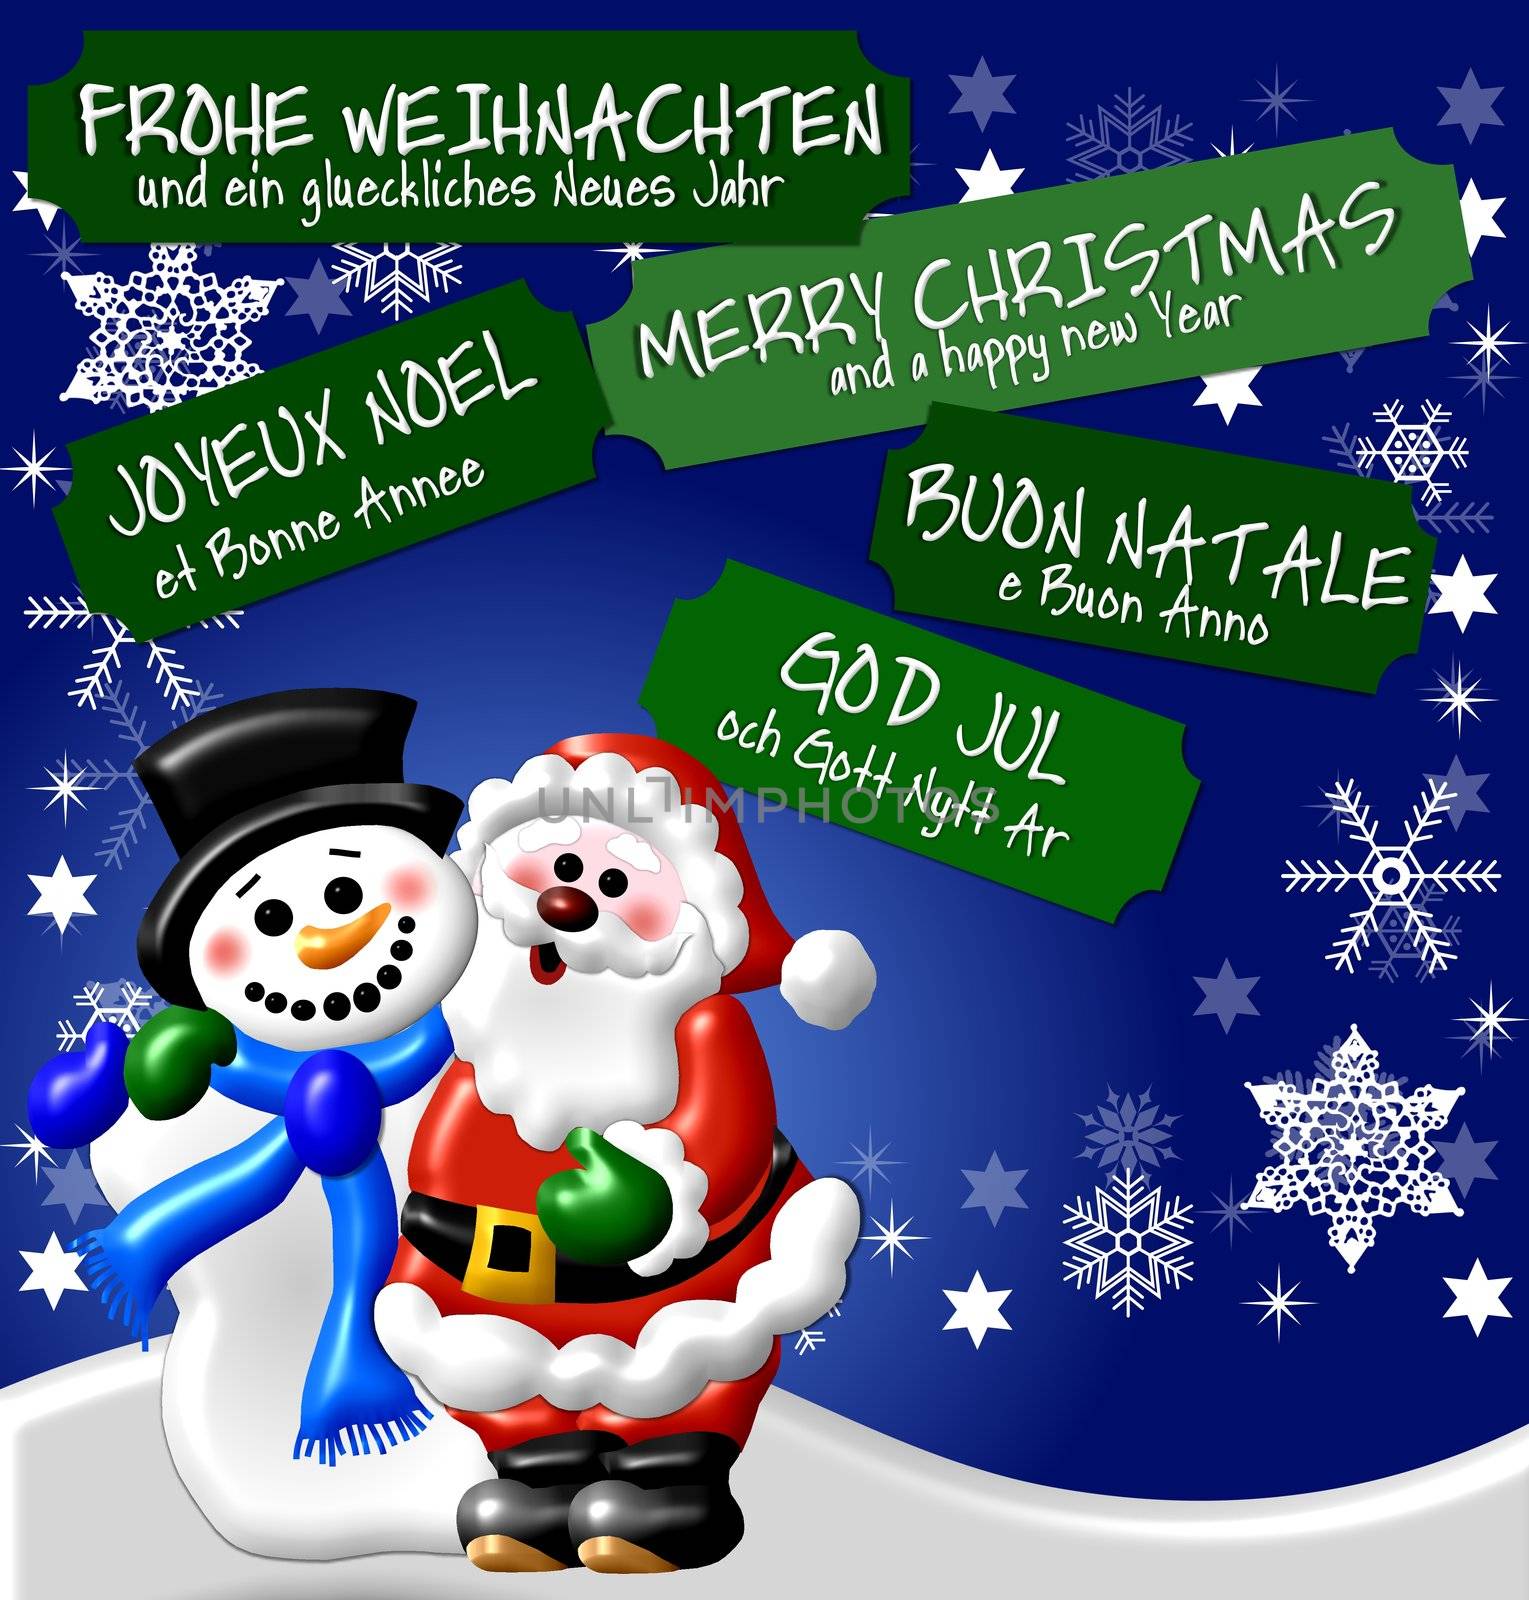 merry christmas in 5 languages by peromarketing